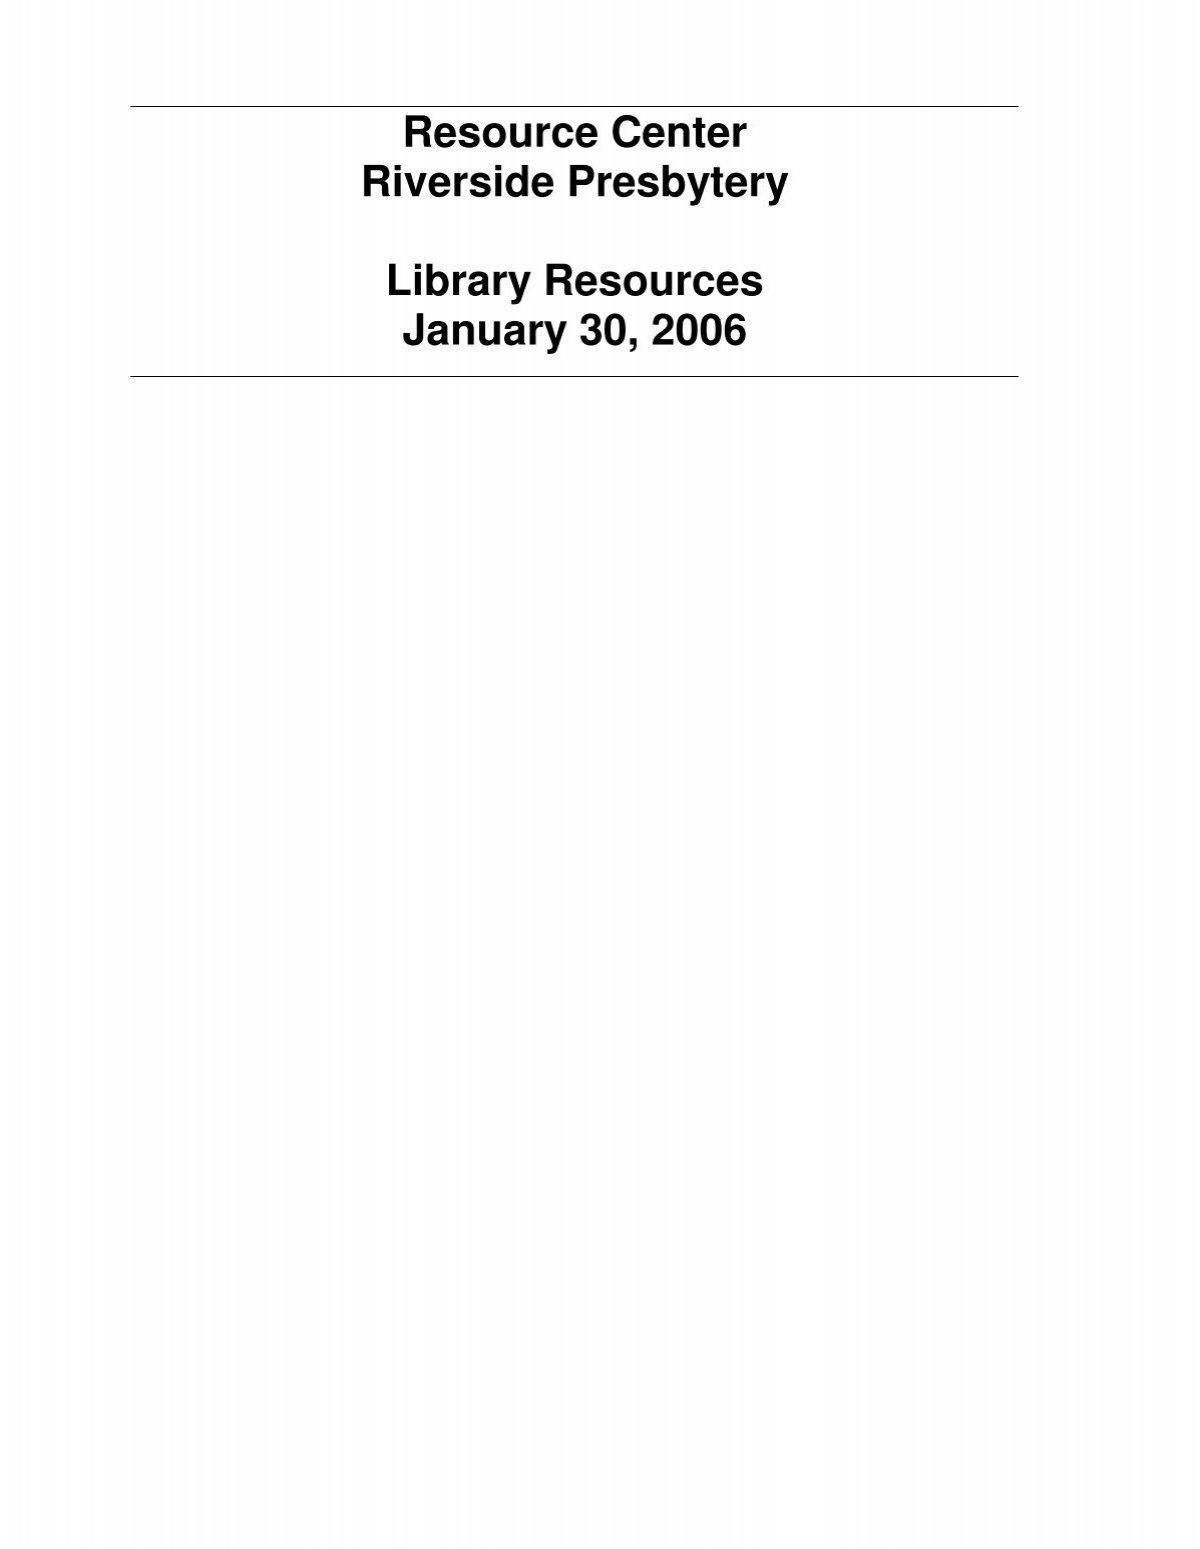 Resource Center Riverside Presbytery Library Resources January